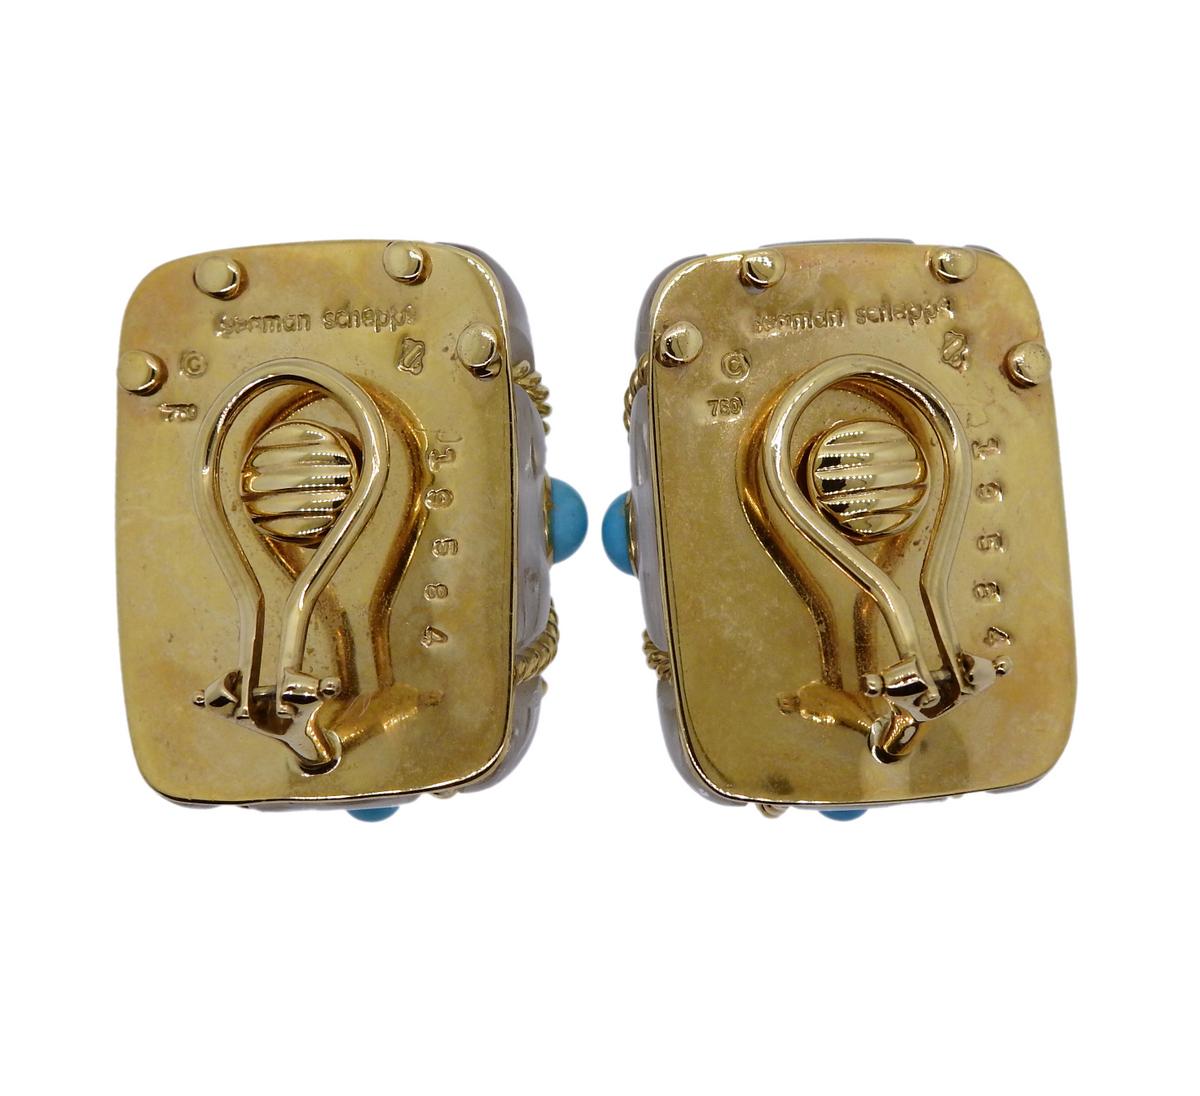 Pair of 18k gold Cage earrings, designed by Seaman Schepps, set with crystal and turquoise. Come with box. Earrings are 25mm x 20mm and weigh 31 grams. Marked 750, 19584, Seaman Schepps, Shell hallmark.